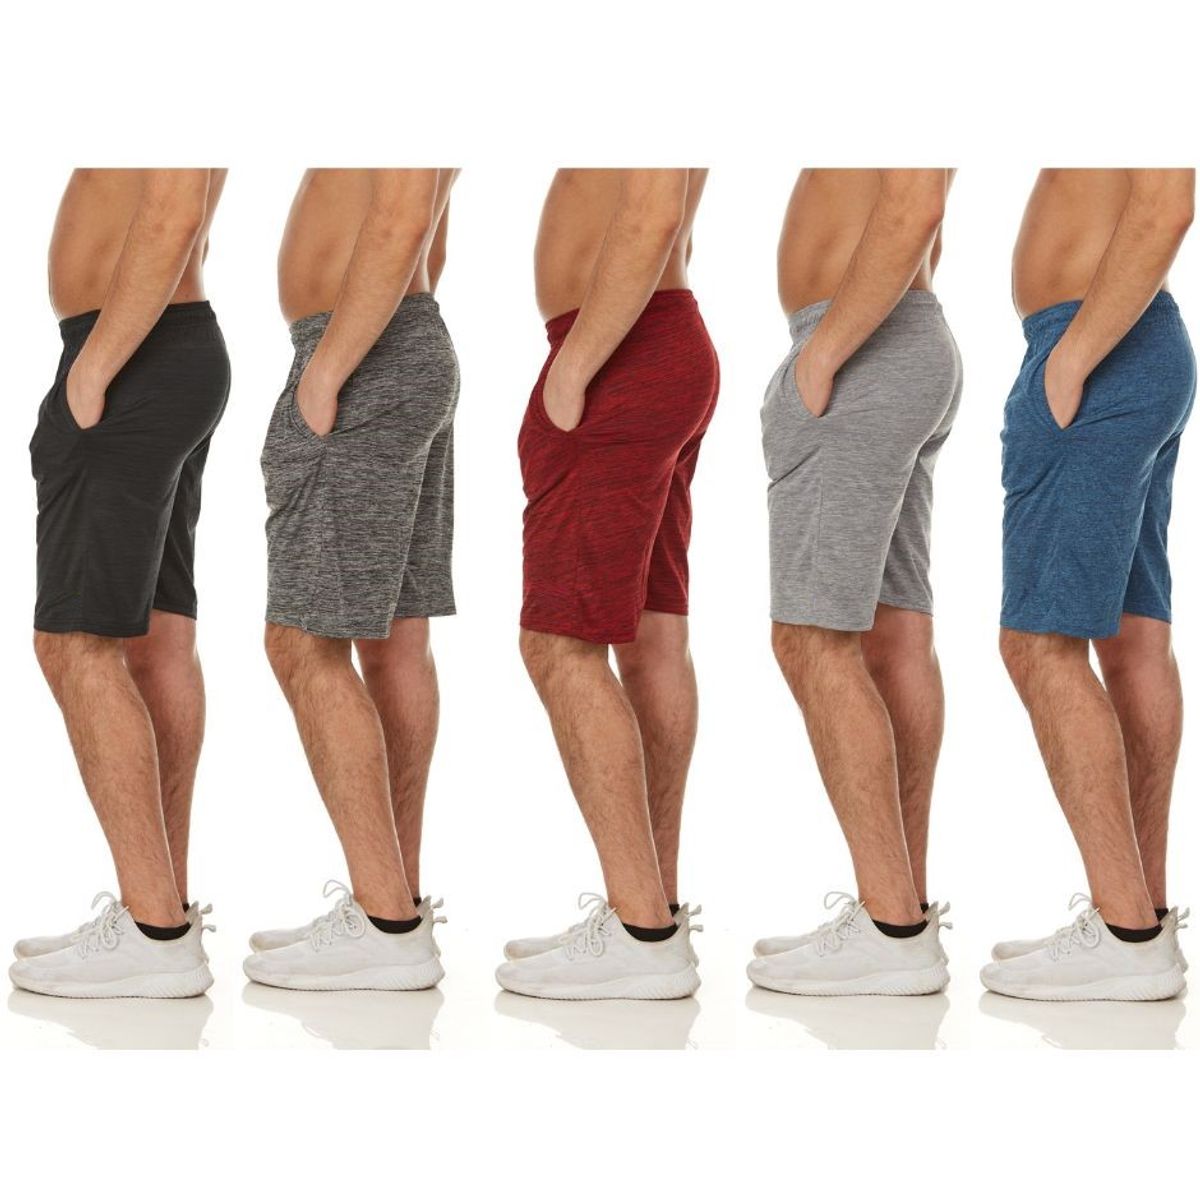 5-Pack: Men's Active Athletic Dry-Fit Performance Shorts